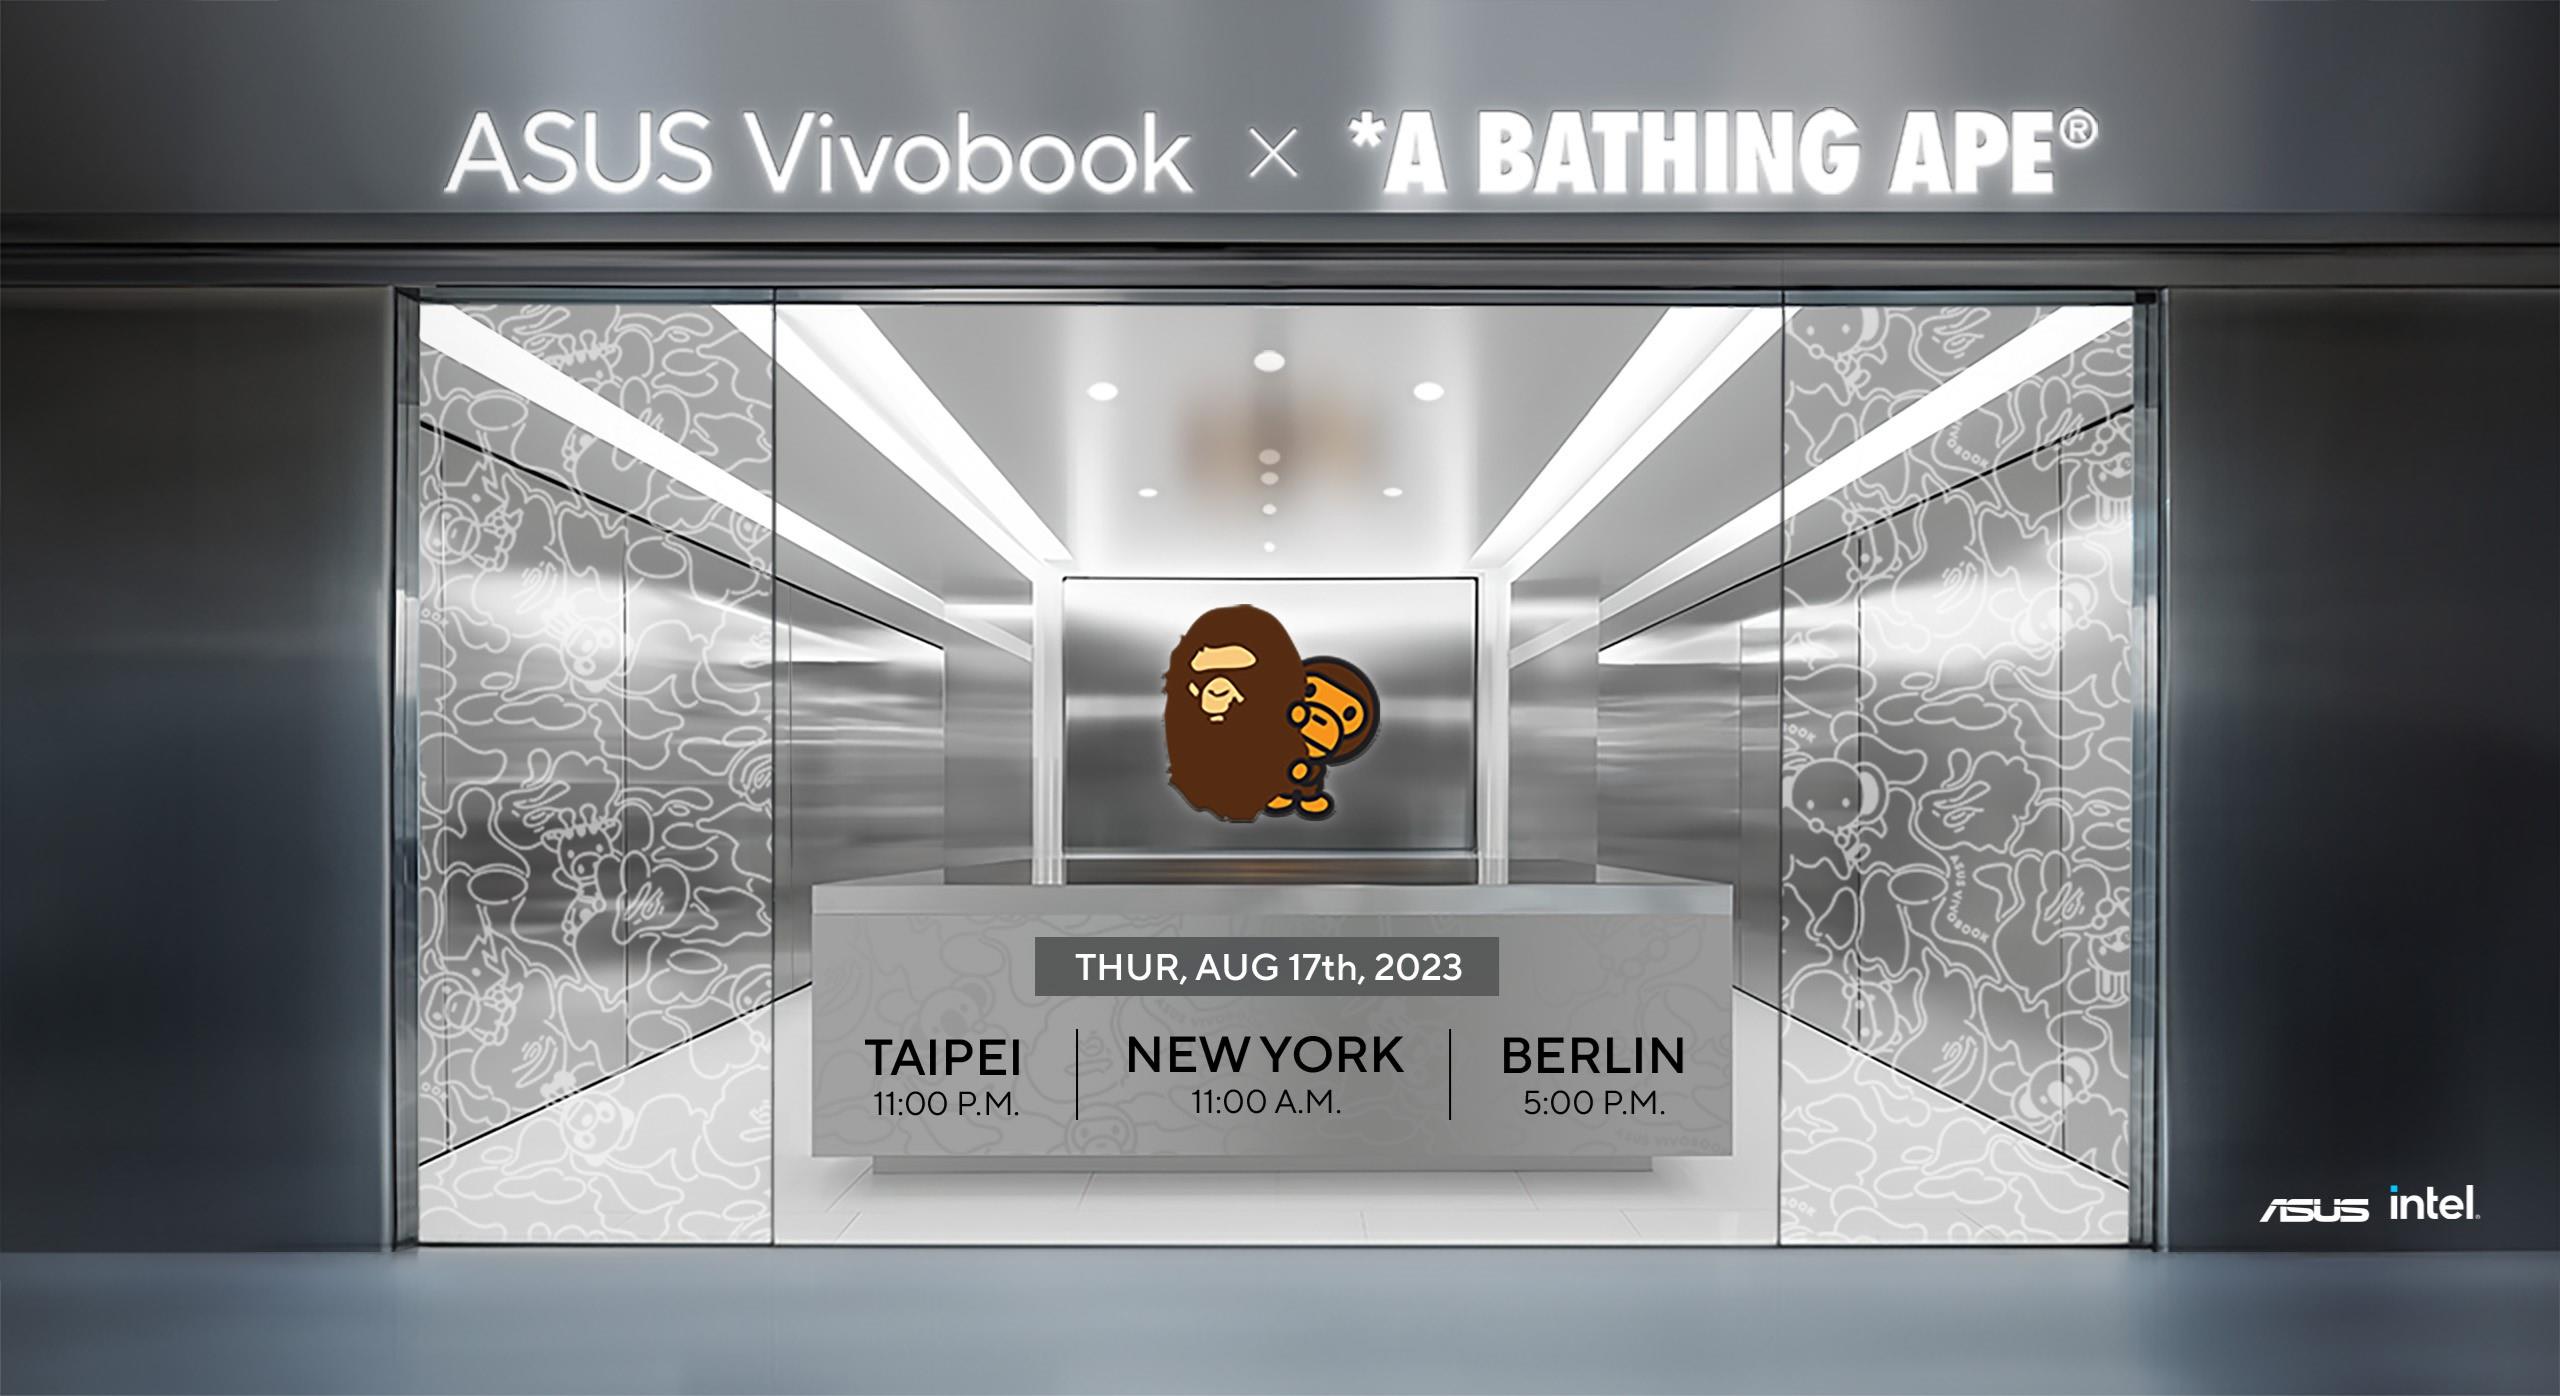 ASUS Vivobook and A BATHING APE, Thurs August 17th 2023 at 11 AM in New York